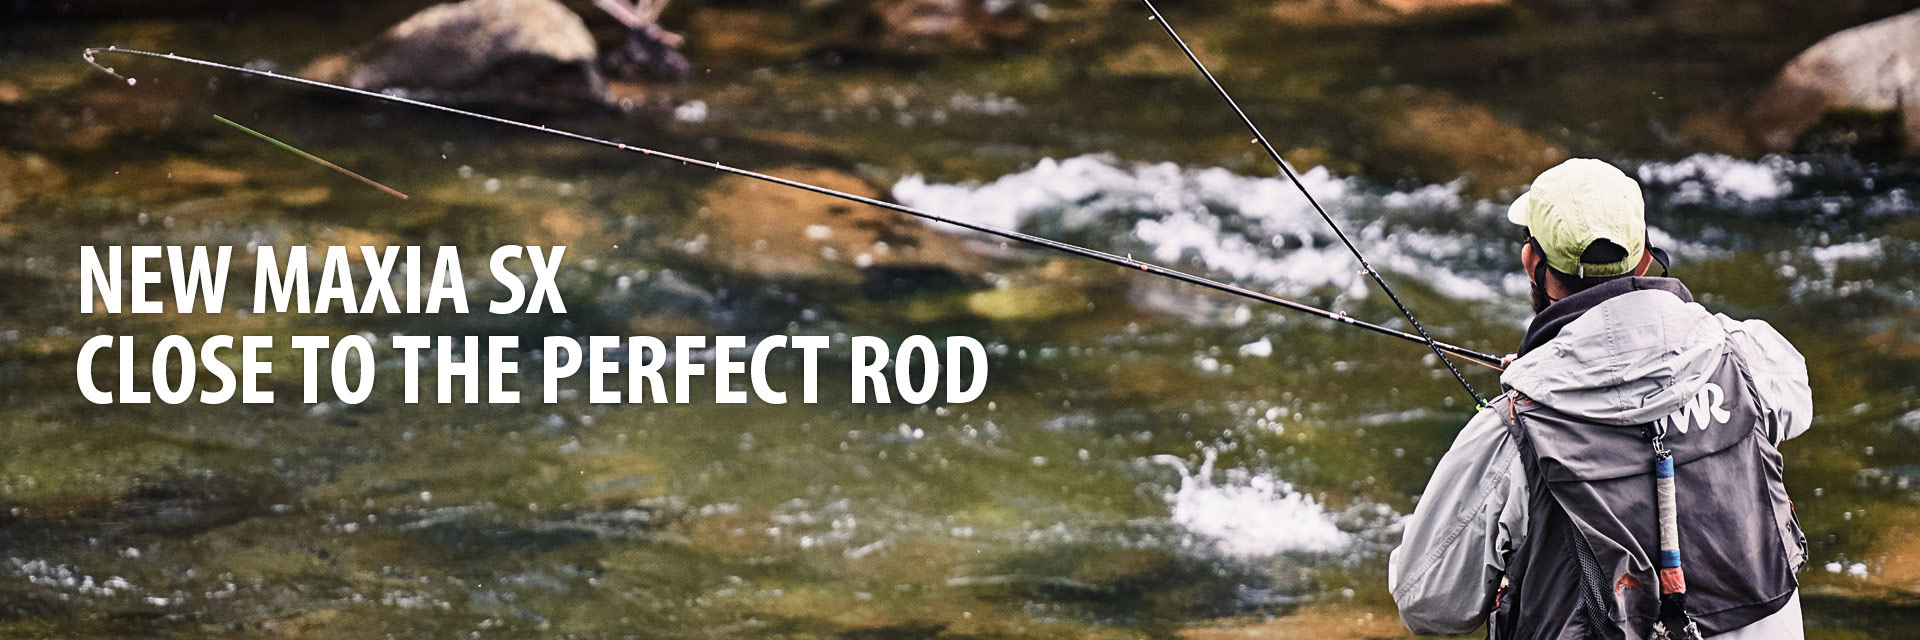 fly-fishing-rods-1